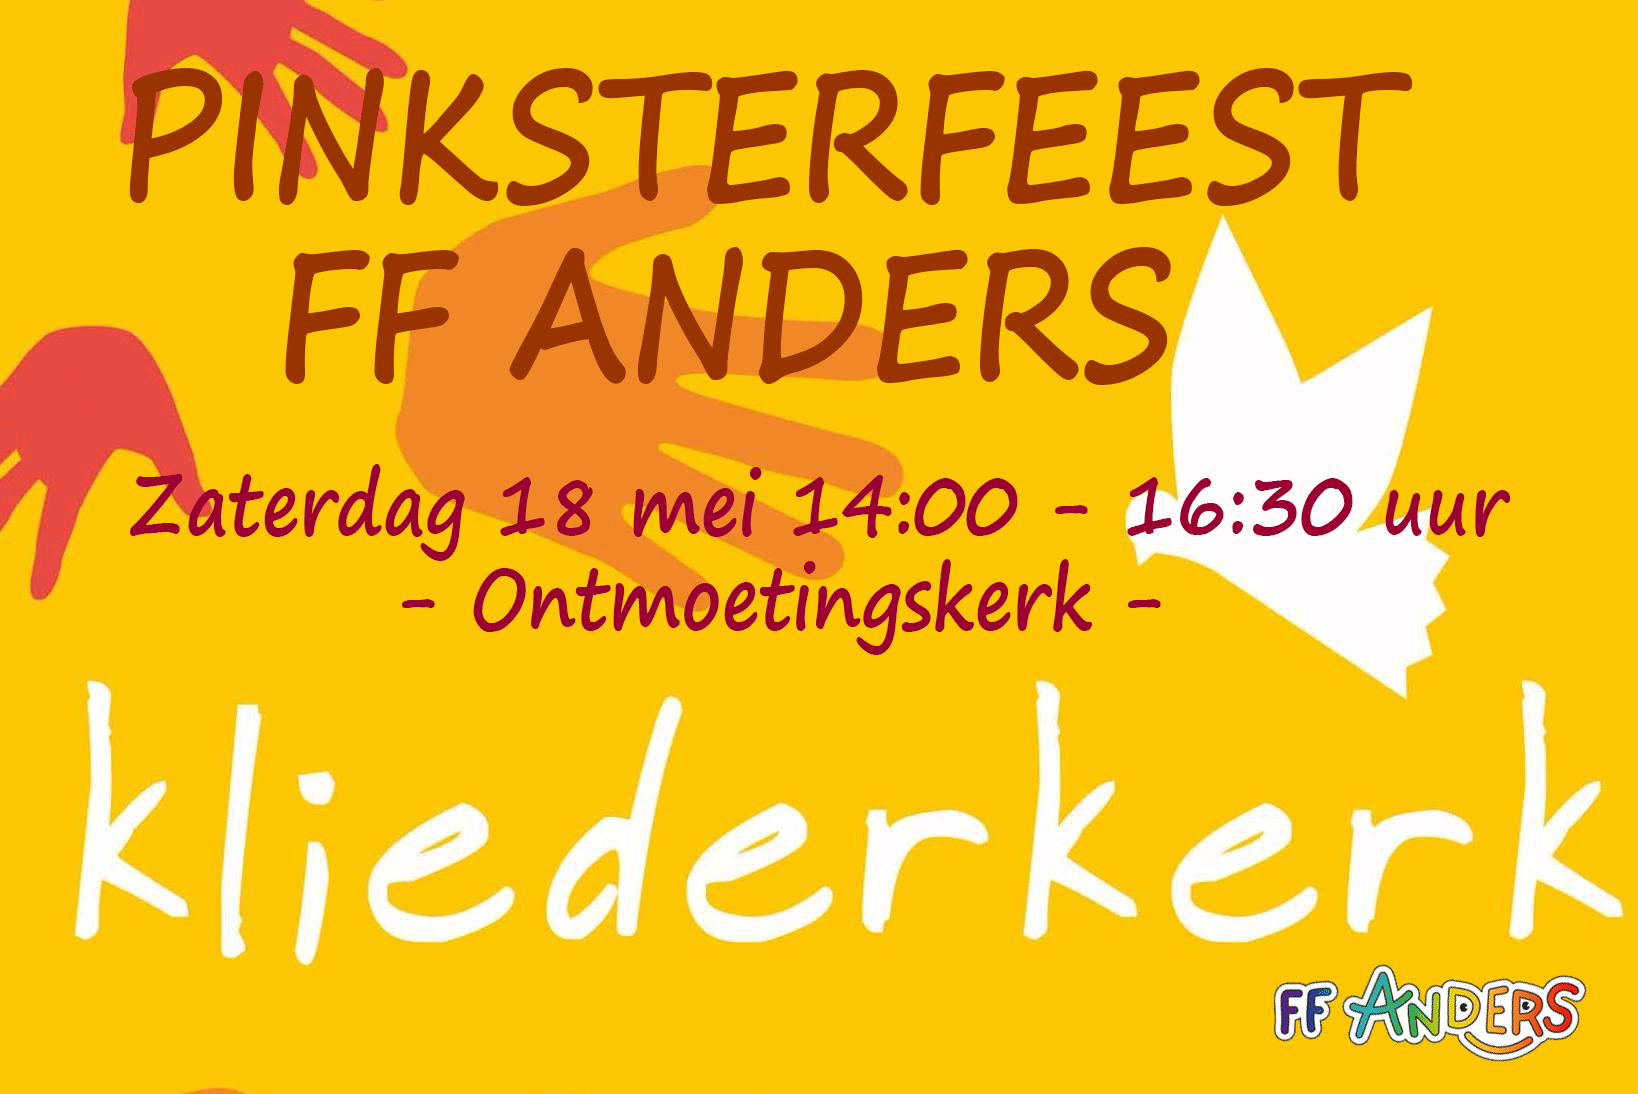 Pinksterfeest  FF anders